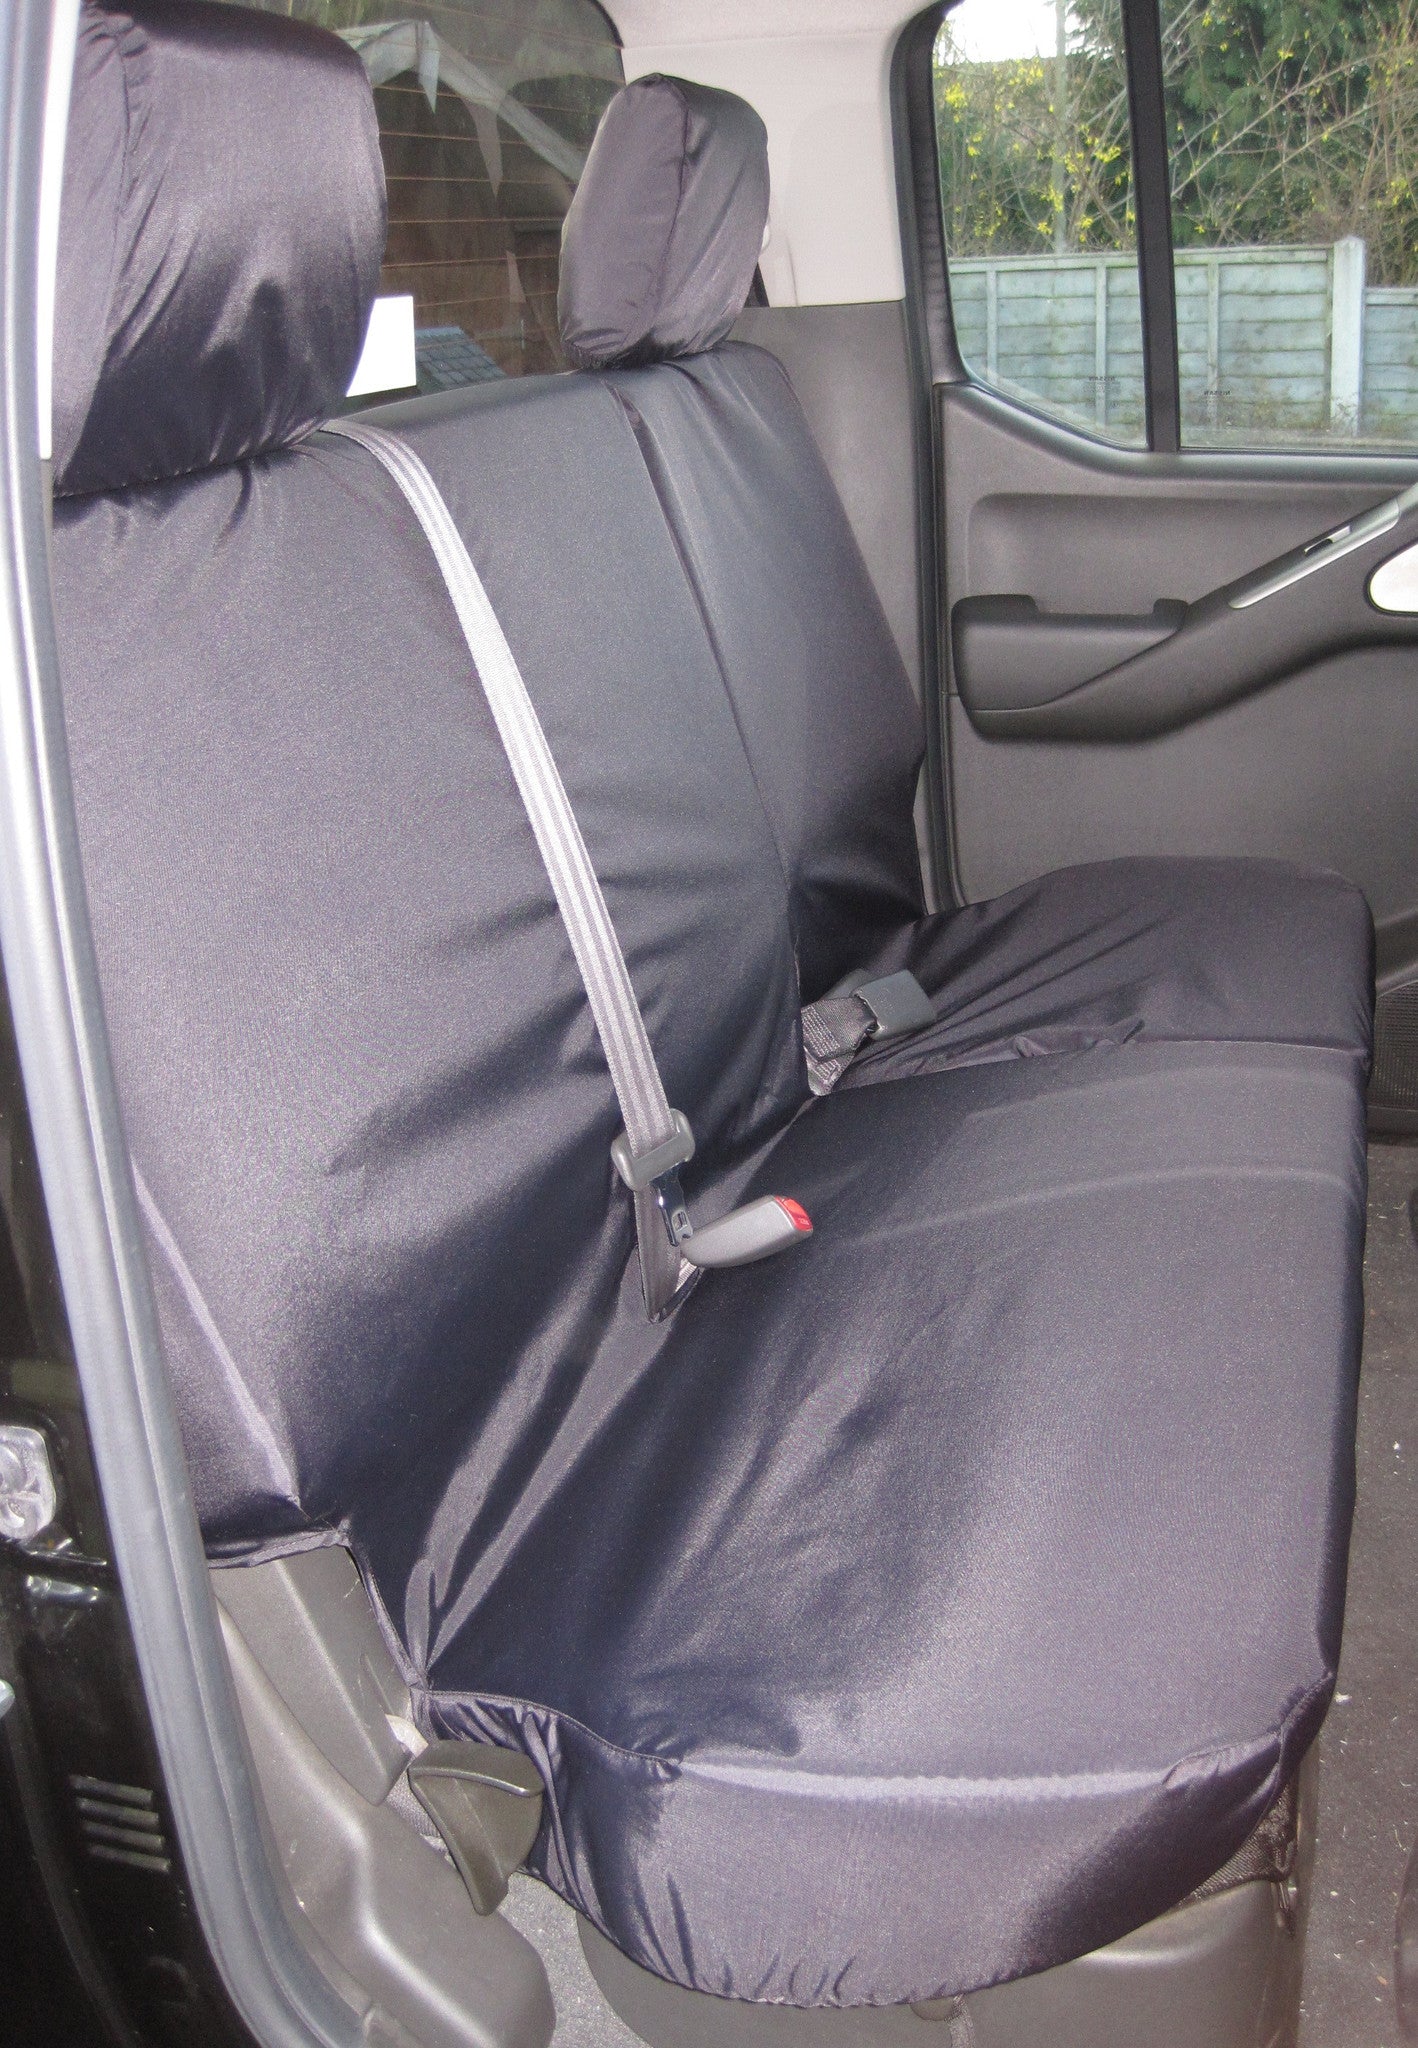 Nissan Navara Double Cab (2005 to 2016) Tailored Seat Covers Rear Seats / Black Turtle Covers Ltd